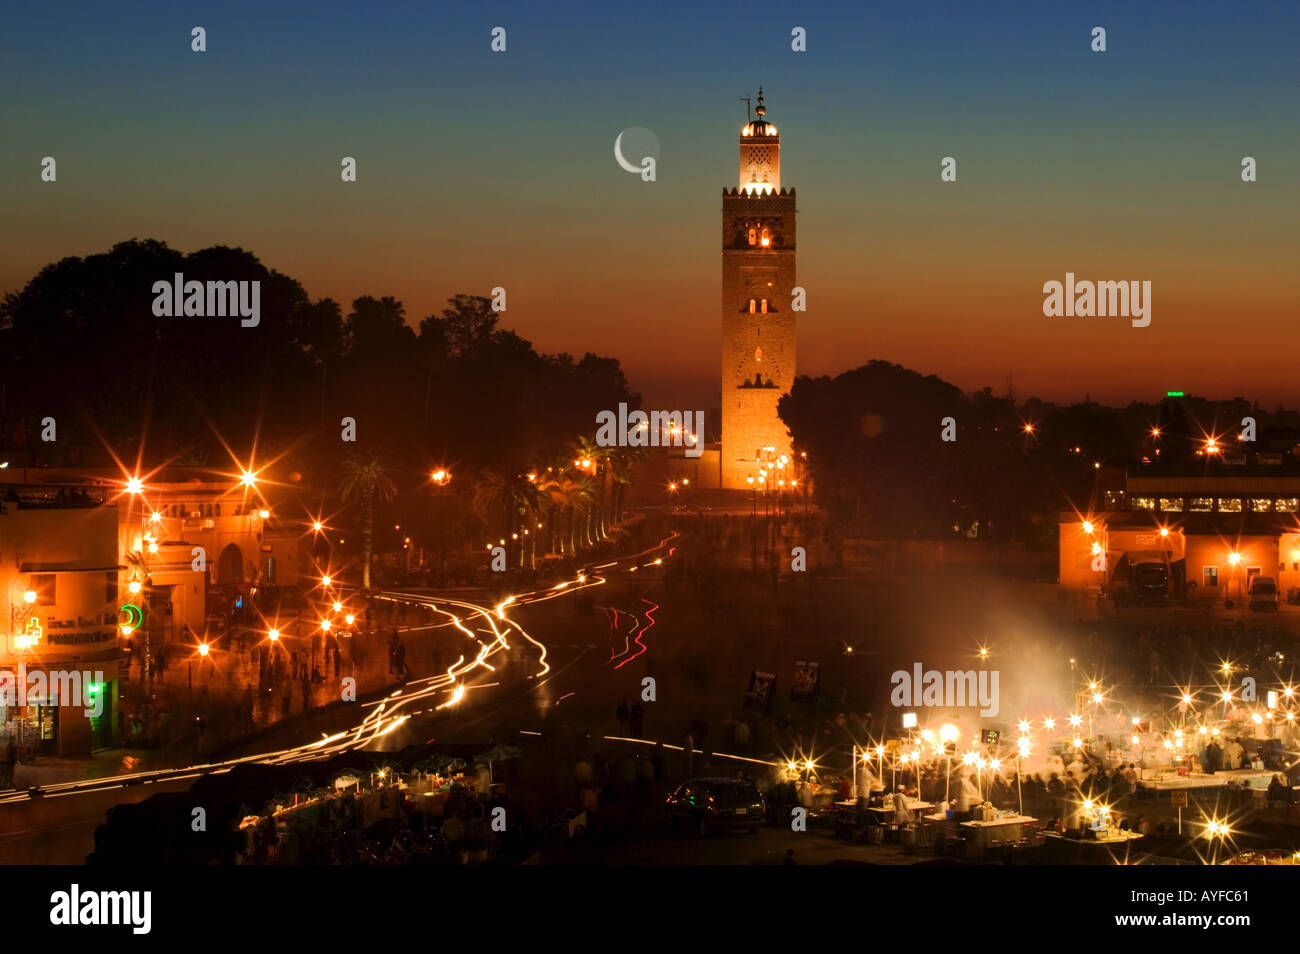 City View of people and lights in the Djemaa el Fna market place Koutoubia Mosque in the background Marrakesh Morocco Stock Photo